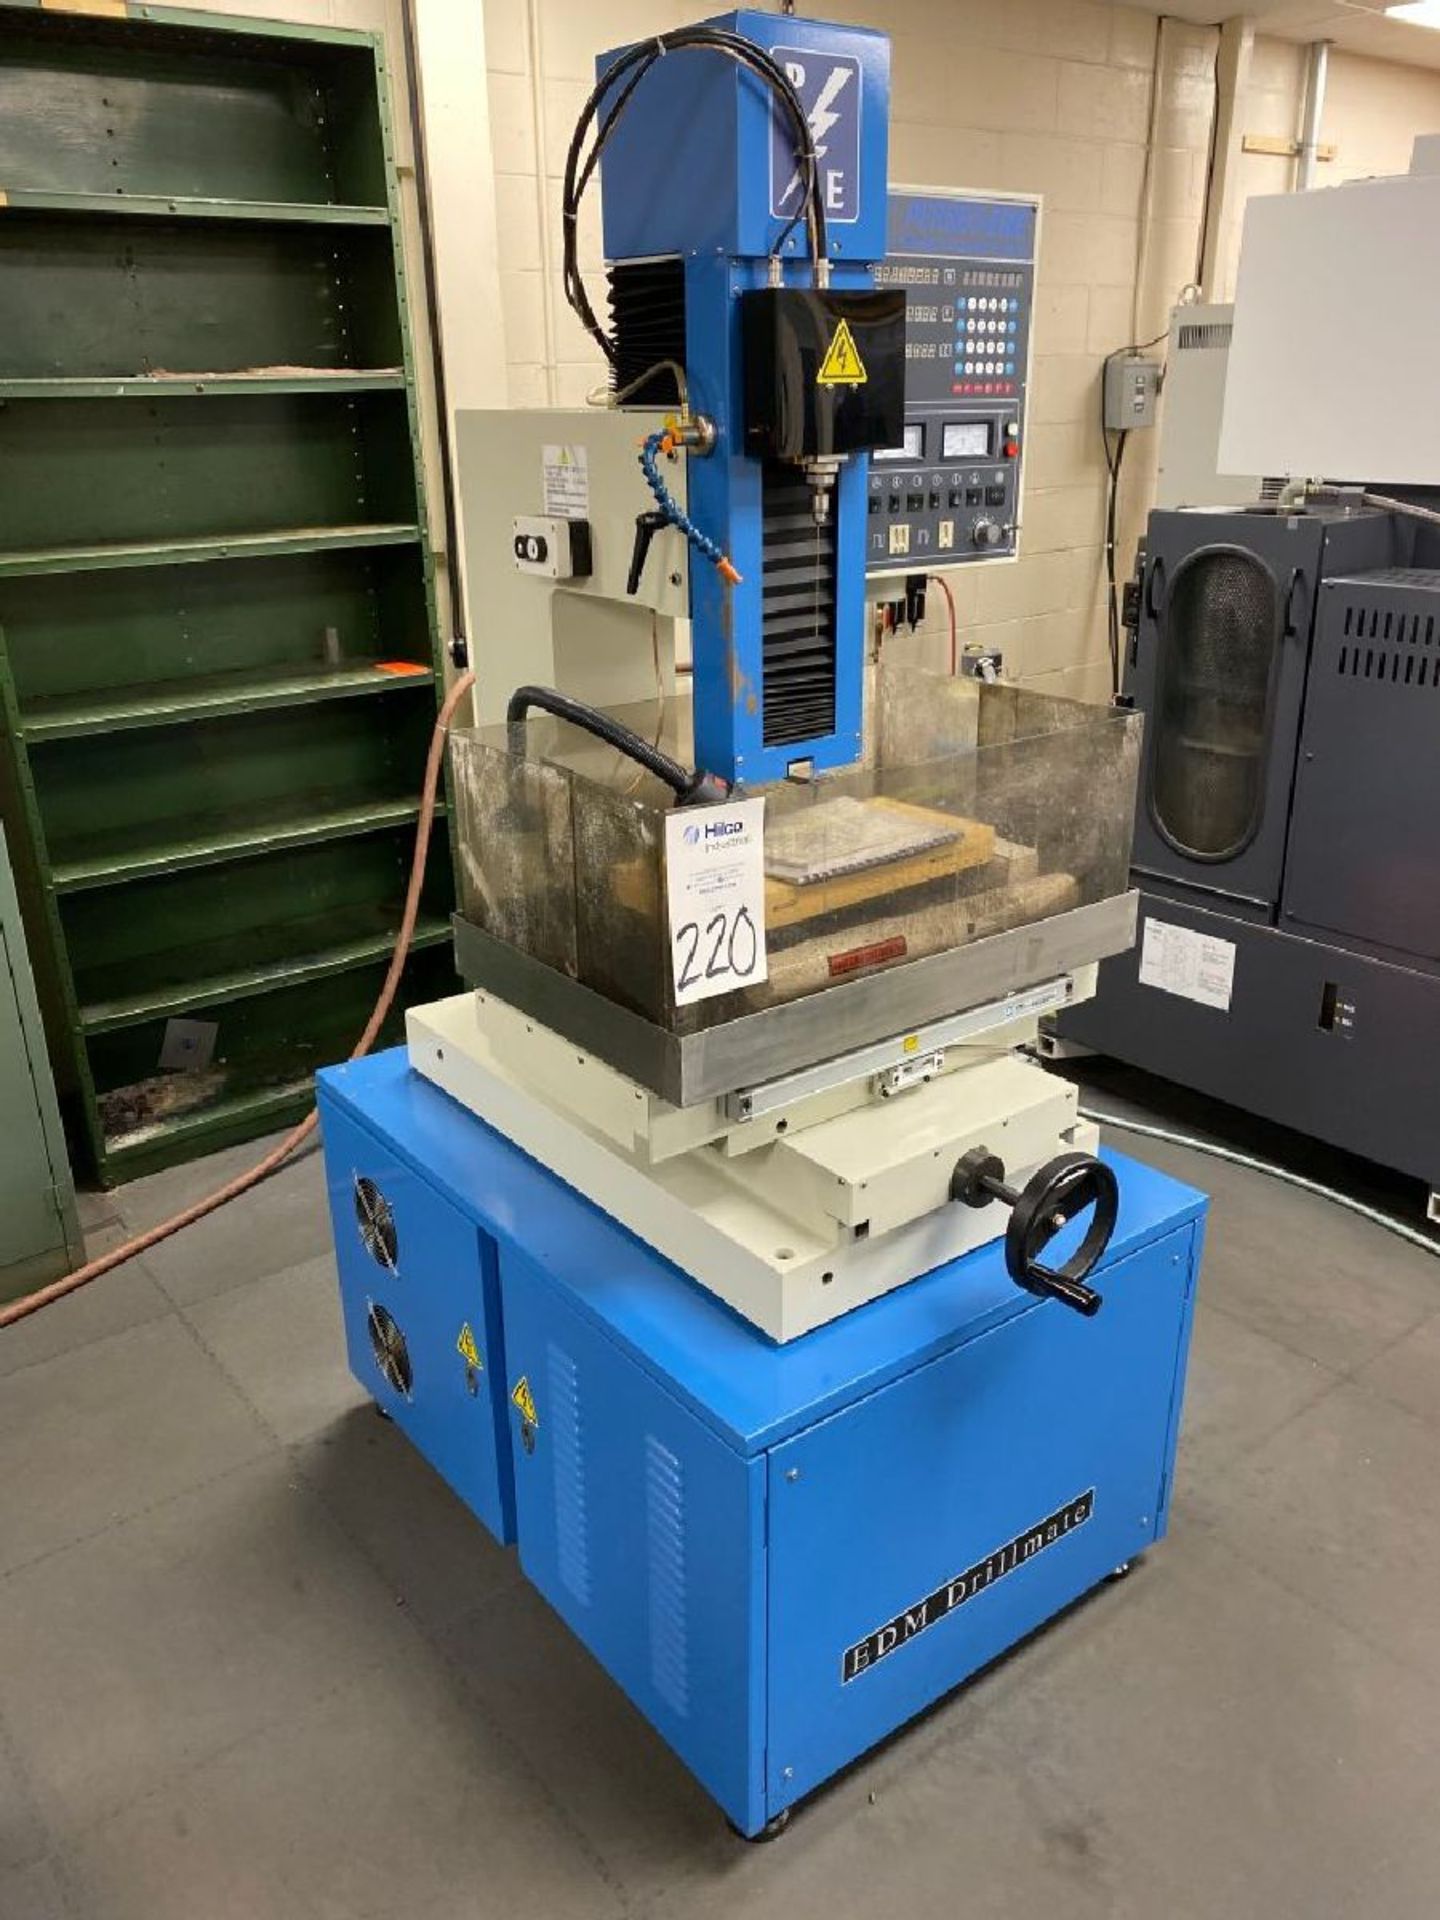 Perseo-Erie Model Drillmate 20 Hole Popper Electrical Discharge Machine